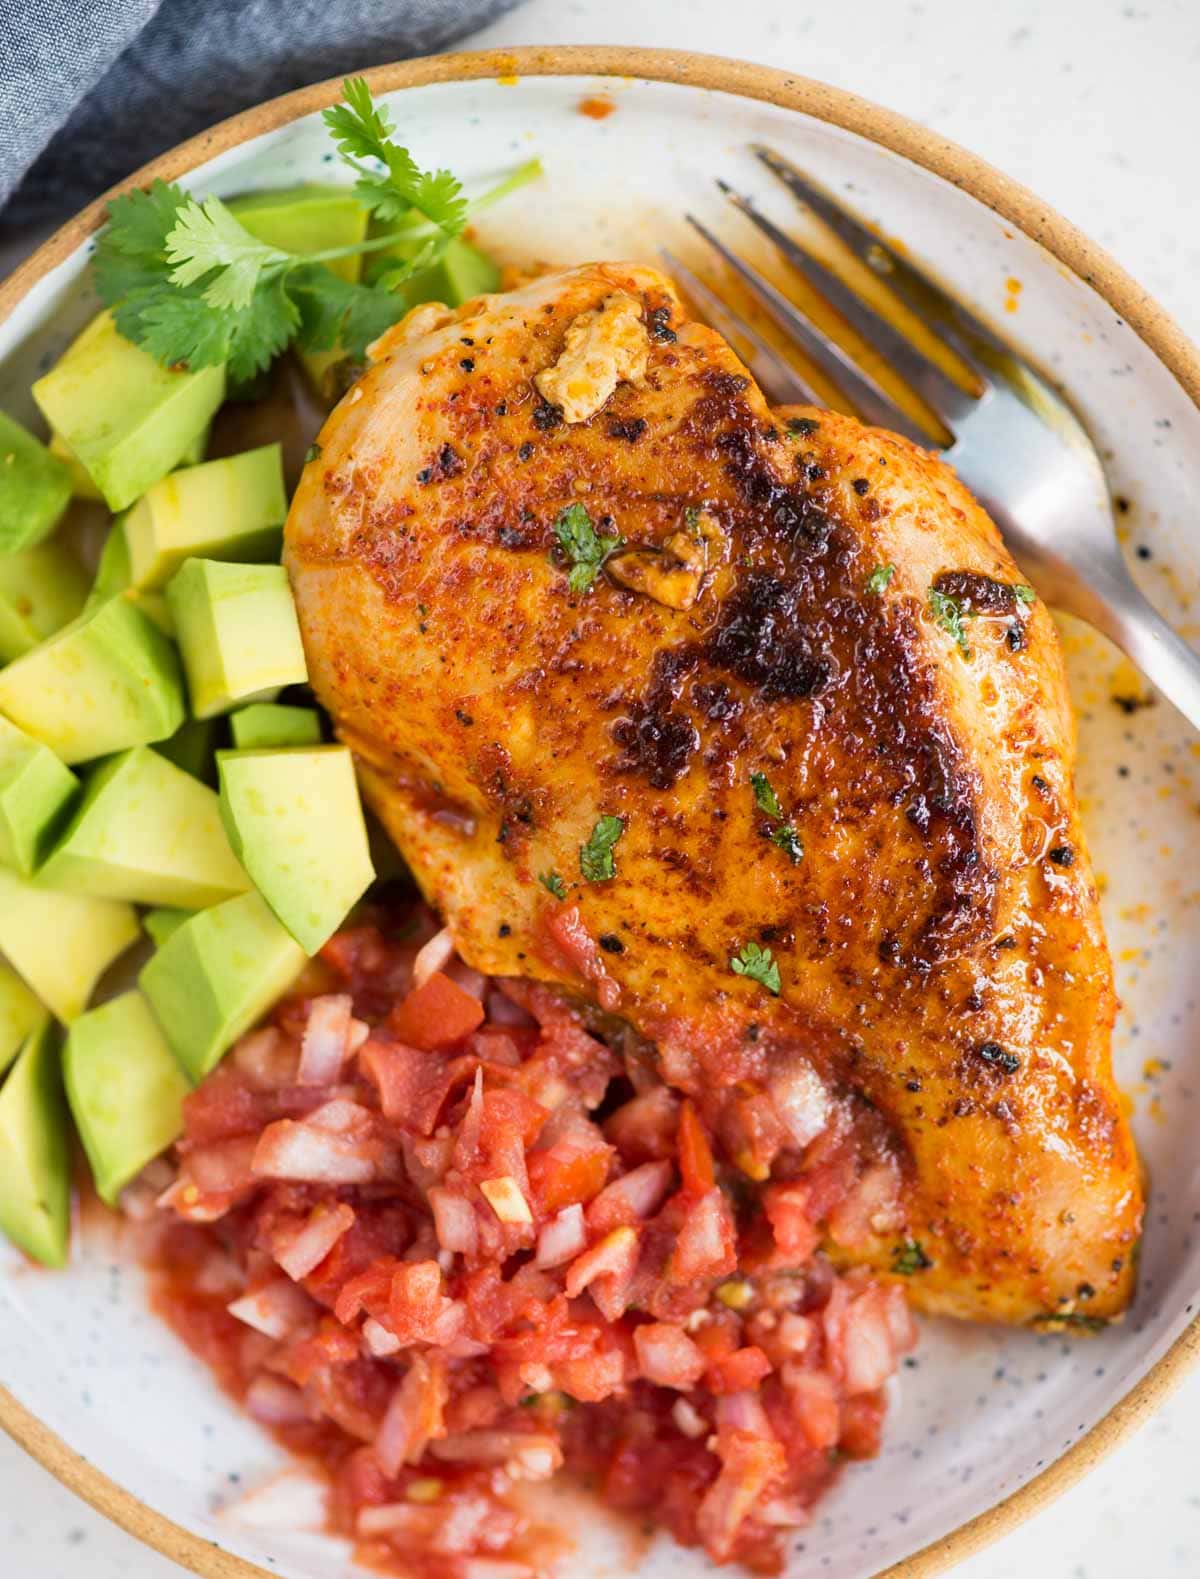 Chicken breast stuffed with fajita-seasoned stuffing, seared and baked and served along with avocado and salsa on a white plate.